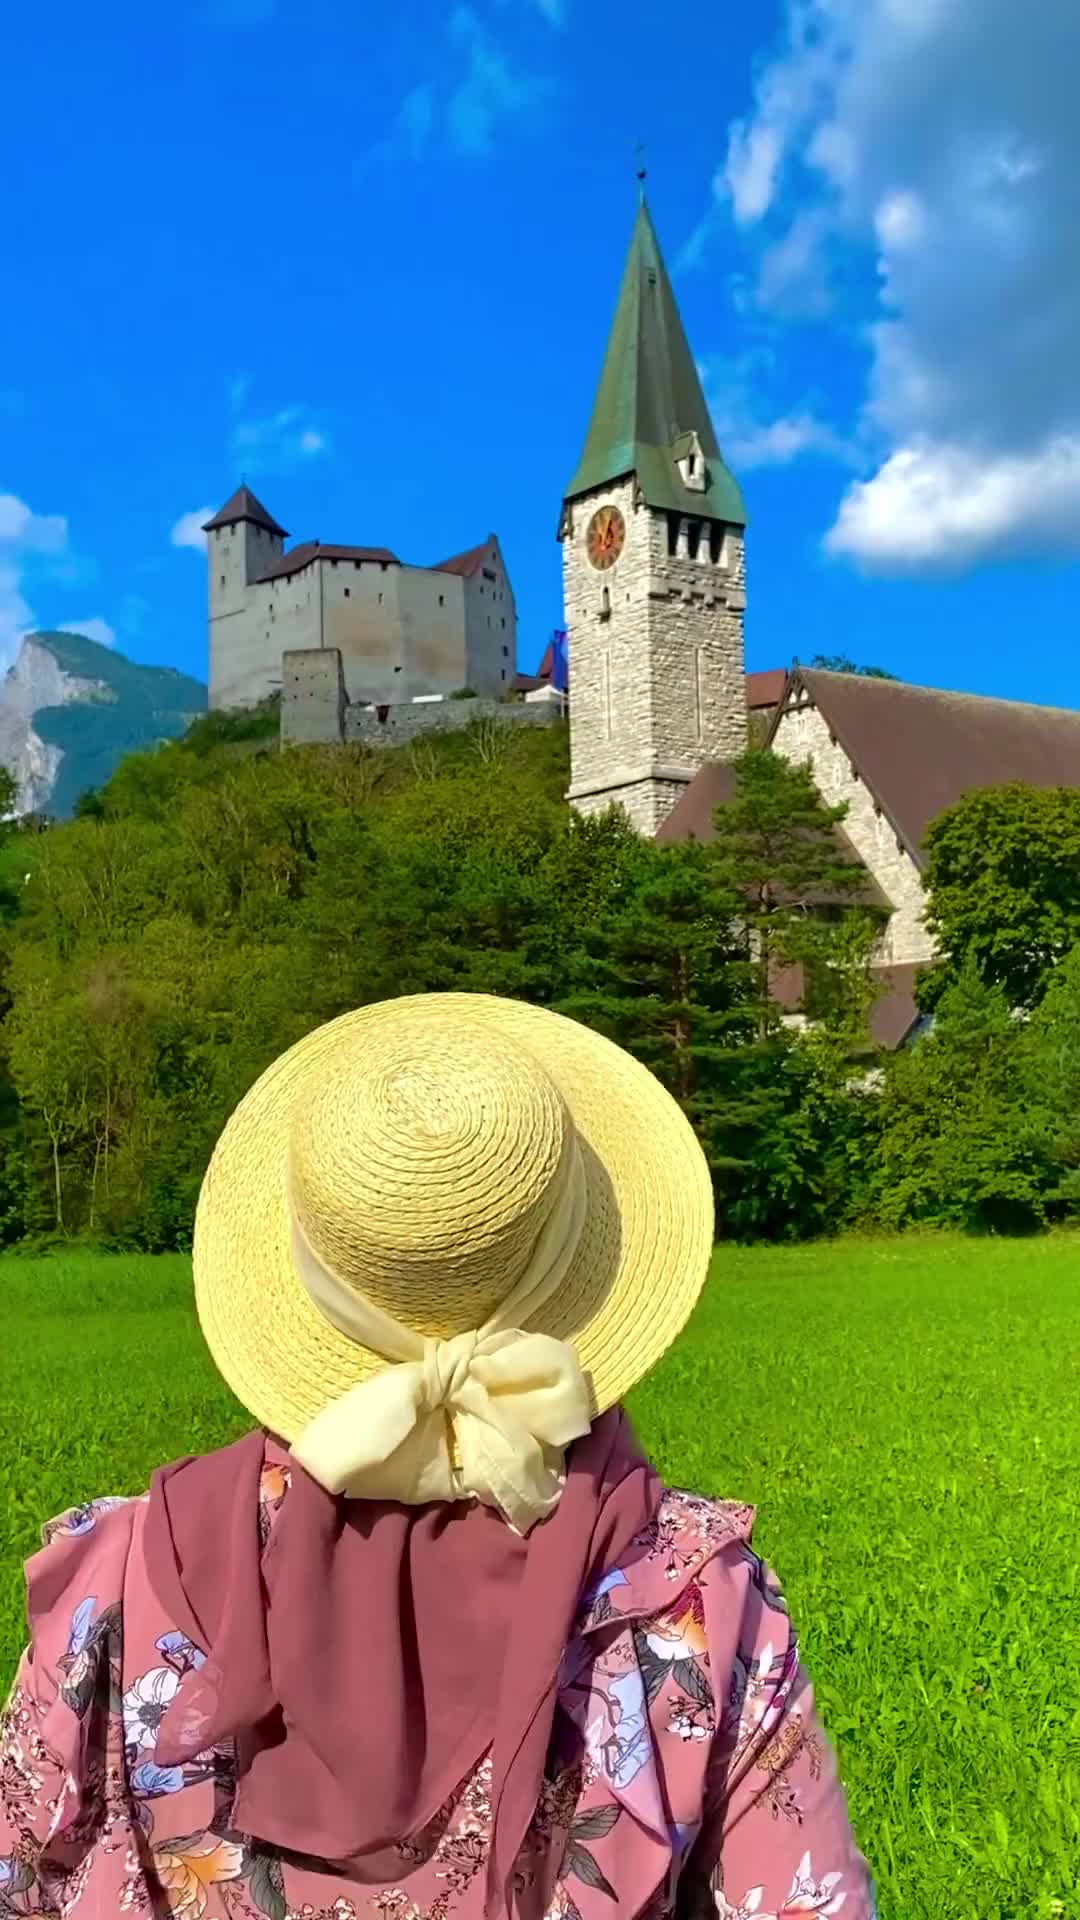 @parkhotel_sonnenhof MUST-TRY HOTEL IN LIECHTENSTEIN 🇱🇮 THE 6TH SMALLEST COUNTRY IN THE WORLD🌎 

❤️ SAVE this reel for YOUR NEXT SWISS & LIECHTENSTEIN TRIP🇨🇭✈️

🚗🚌🚶‍♀️LESS THAN 5 MINS FROM SWITZERLAND 🇨🇭

🏰THE REAL EXPERIENCE OF LIECHTENSTEIN 🇱🇮 KINGDOM

⭐️HOTEL WHERE THE GUESTS OF LIECHTENSTEIN PRINCE 🇱🇮👑STAY

📍LOCATED NEXT TO LIECHTENSTEIN CASTLE (THE LANDMARK, MASCOT, MUST-SEE ATTRACTIONS IN 🇱🇮)

🏰🏔THE BEST VIEW HOTEL IN 🇱🇮: YOU CAN SEE THE CASTLE AND MORE THAN 25 MOUNTAIN PEAKS

✅HOTEL RESTAURANT: THE LIECHTENSTEIN PRINCE’S WEDDING CHEF, AWARDED 17 GAULT & MILLAU POINTS

✅29 HOTEL ROOMS, MOST OF THEM WITH BALCONY OR TERRACE

✅ wellness oasis bathroom, eco-friendly water cooling system, free WIFI, Safe, Flat LED TV, telephone, Minbar, Nespresso Mashine, bathrobe, slippers, hair dryer, makeup mirror and amenities.

✅ FREE SPA, POOL, SAUNA & WELLNESS

✅MANY ATTRACTIVE OFFERS & PACKAGES: Liechtenstein experience, relax day, time for two, Liechtenstein from the skies, etc

❤️FULL HOTEL REVIEWS ON MY IG HIGHLIGHT WITH TITLE “PARK HOTEL SONNENHOF”

#liechtenstein #liechtenstein🇱🇮 #vaduzliechtenstein #visitliechtenstein #palaisliechtenstein #liechtensteincastle #liechtensteinvisit  #visiteurope #visitswitzerland #hotel #beautifuldestinations #voyaged #myswitzerland #bestofswitzerland #cottagecore #beautifulcastle #countryside #swiss #europeblogger #europehotel #swisshotel #İsviçre #europefocus #map_of_europe #vaduz #vaduzliechtenstein #vaduzcastle #vaduz🇱🇮